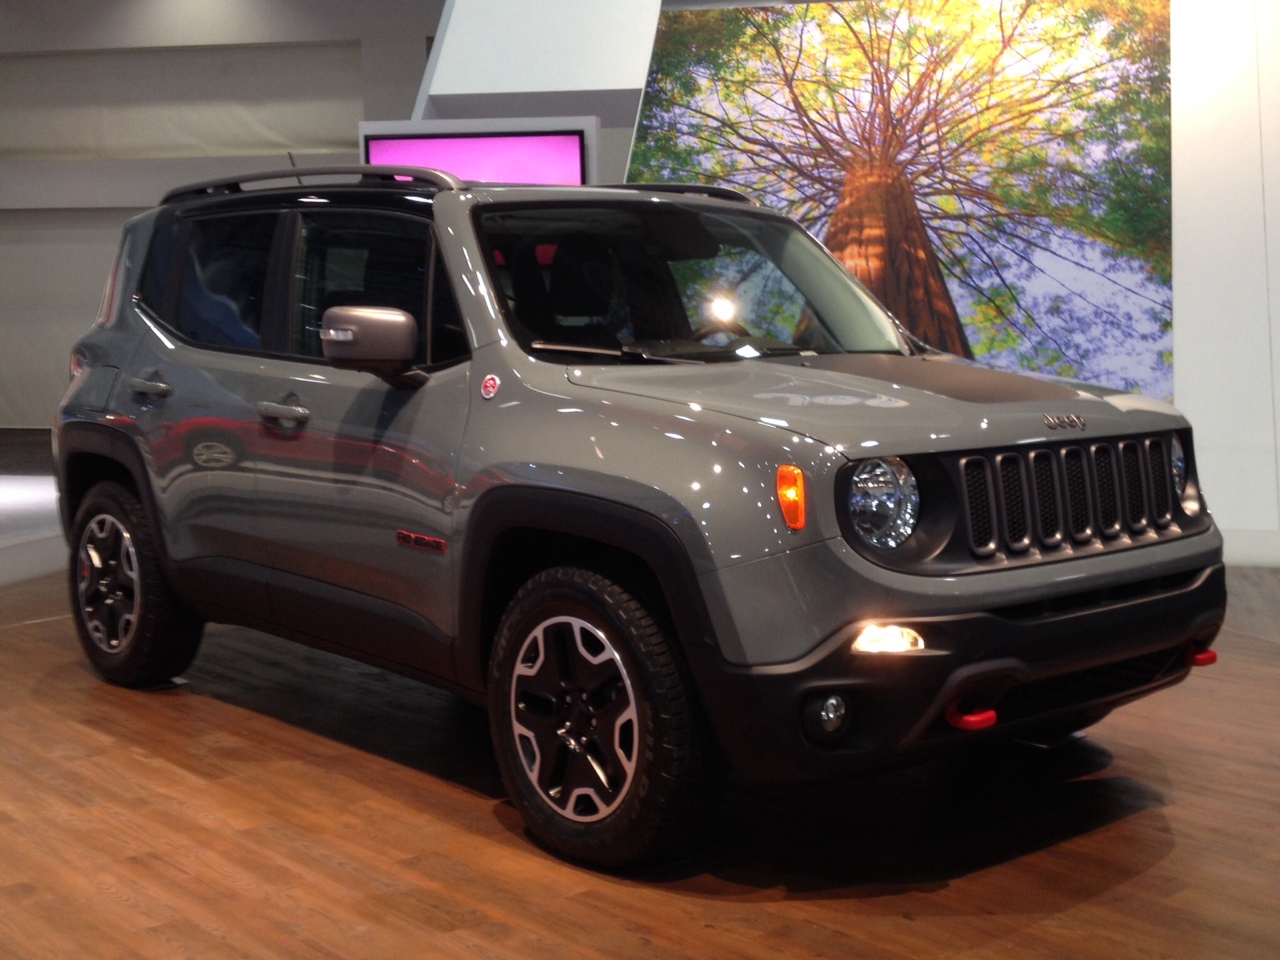 This adorable mini-Jeep is part of the fast-growing small SUV segment. (WTOP/John Aaron)